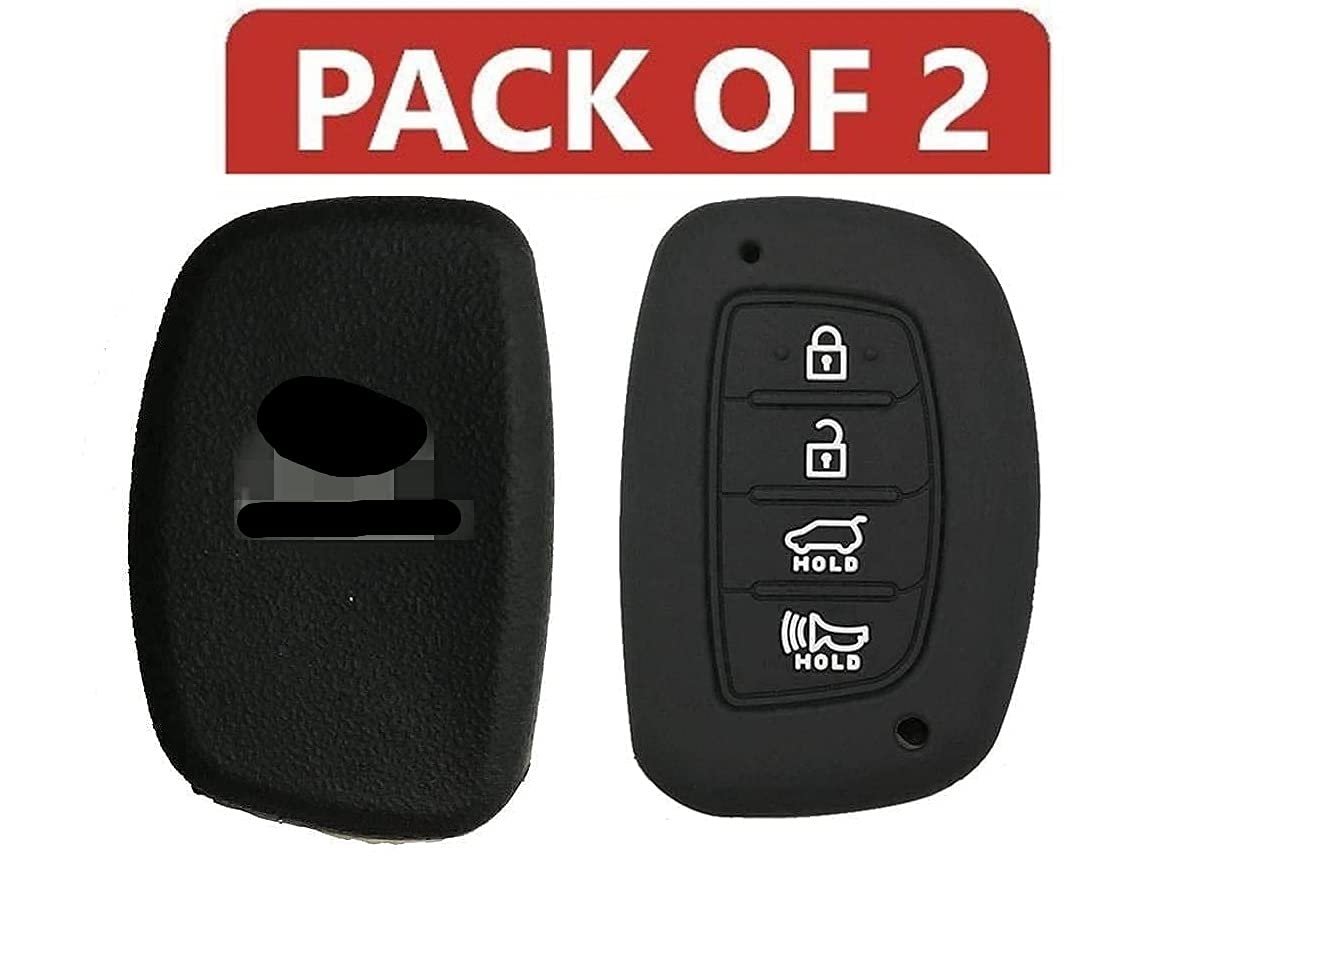 Silicone Key Cover Compatible with Hyundai Venue 4 Button Push Start Model (Black, Pack of 2) Image 